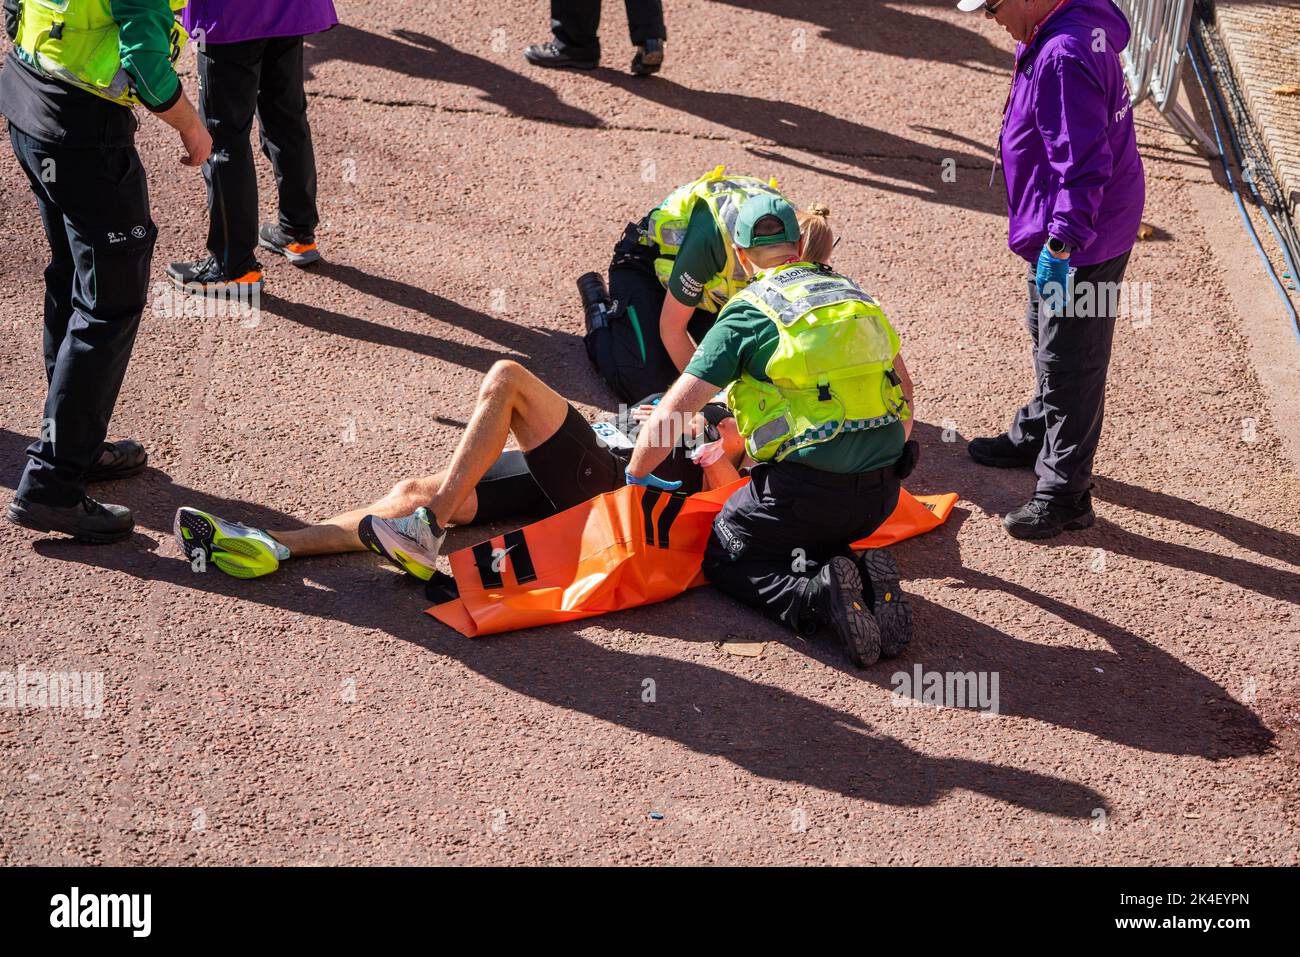 London UK. 2 October 2022 . A marathon runner  is attended  by paramedics after crossing the finishing line at The Mall .More than  40,000 athletes including  elite  runners, club runners and fun runners   take  part in the London Marathon sponsored by TCS Tata Consultancy Services over a 26.2 mile course.Credit: amer ghazzal/Alamy Live News. Stock Photo